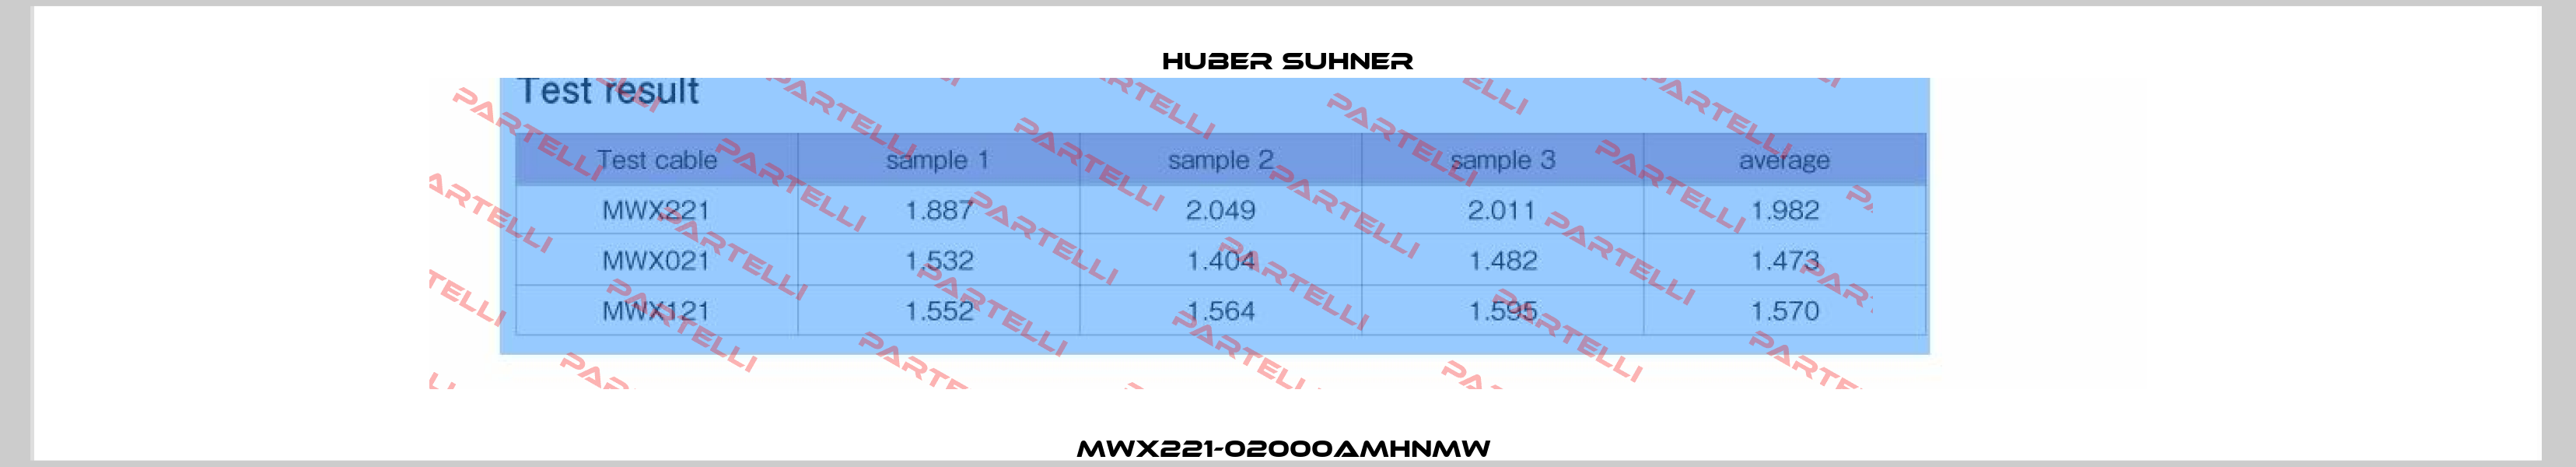 MWX221-02000AMHNMW  Huber Suhner